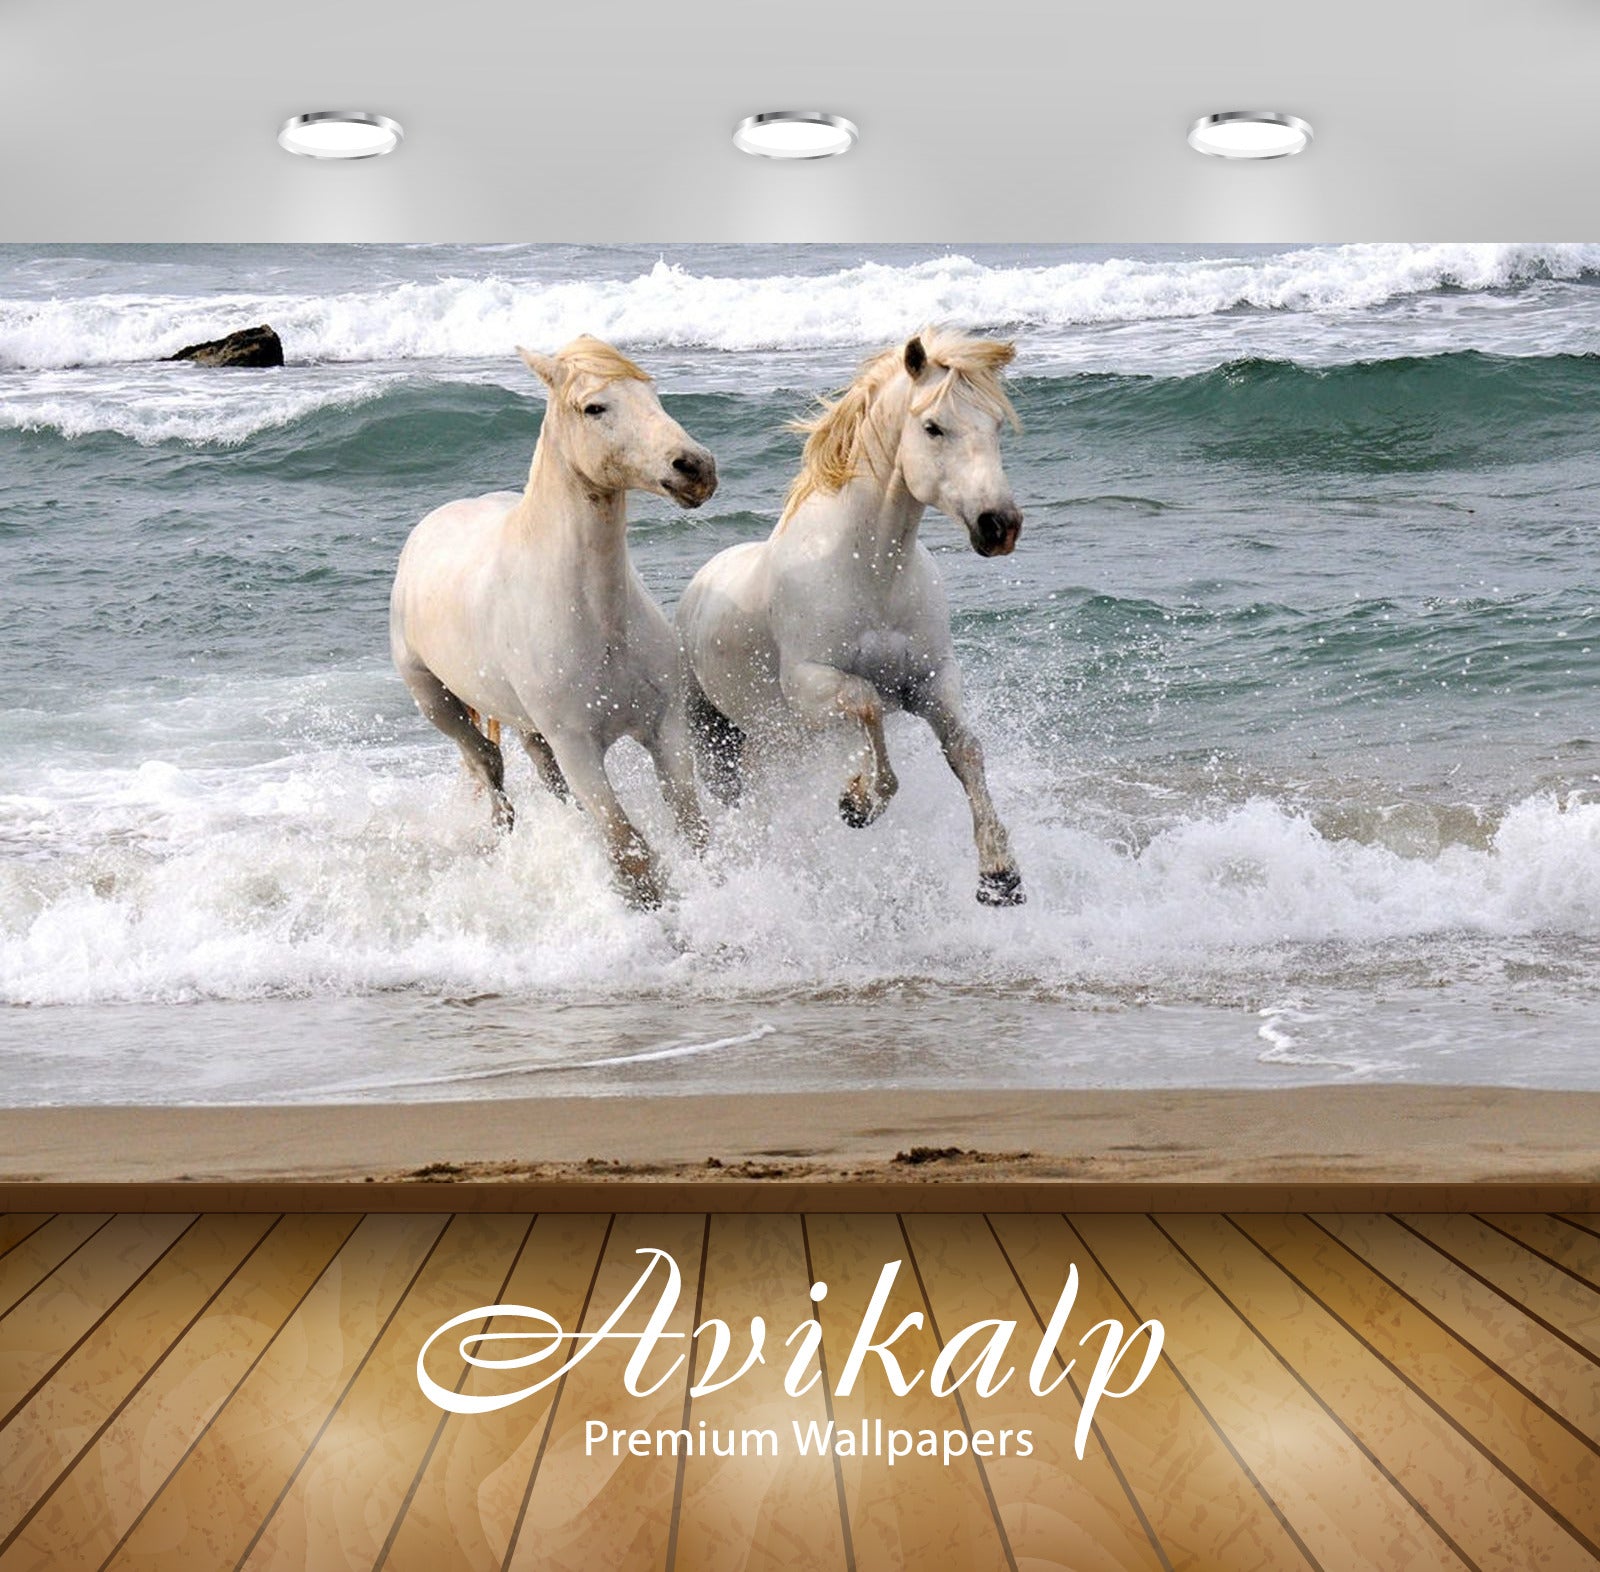 Avikalp Exclusive Awi2225 Horses white sand beach galloping in waves Full HD Wallpapers for Living r